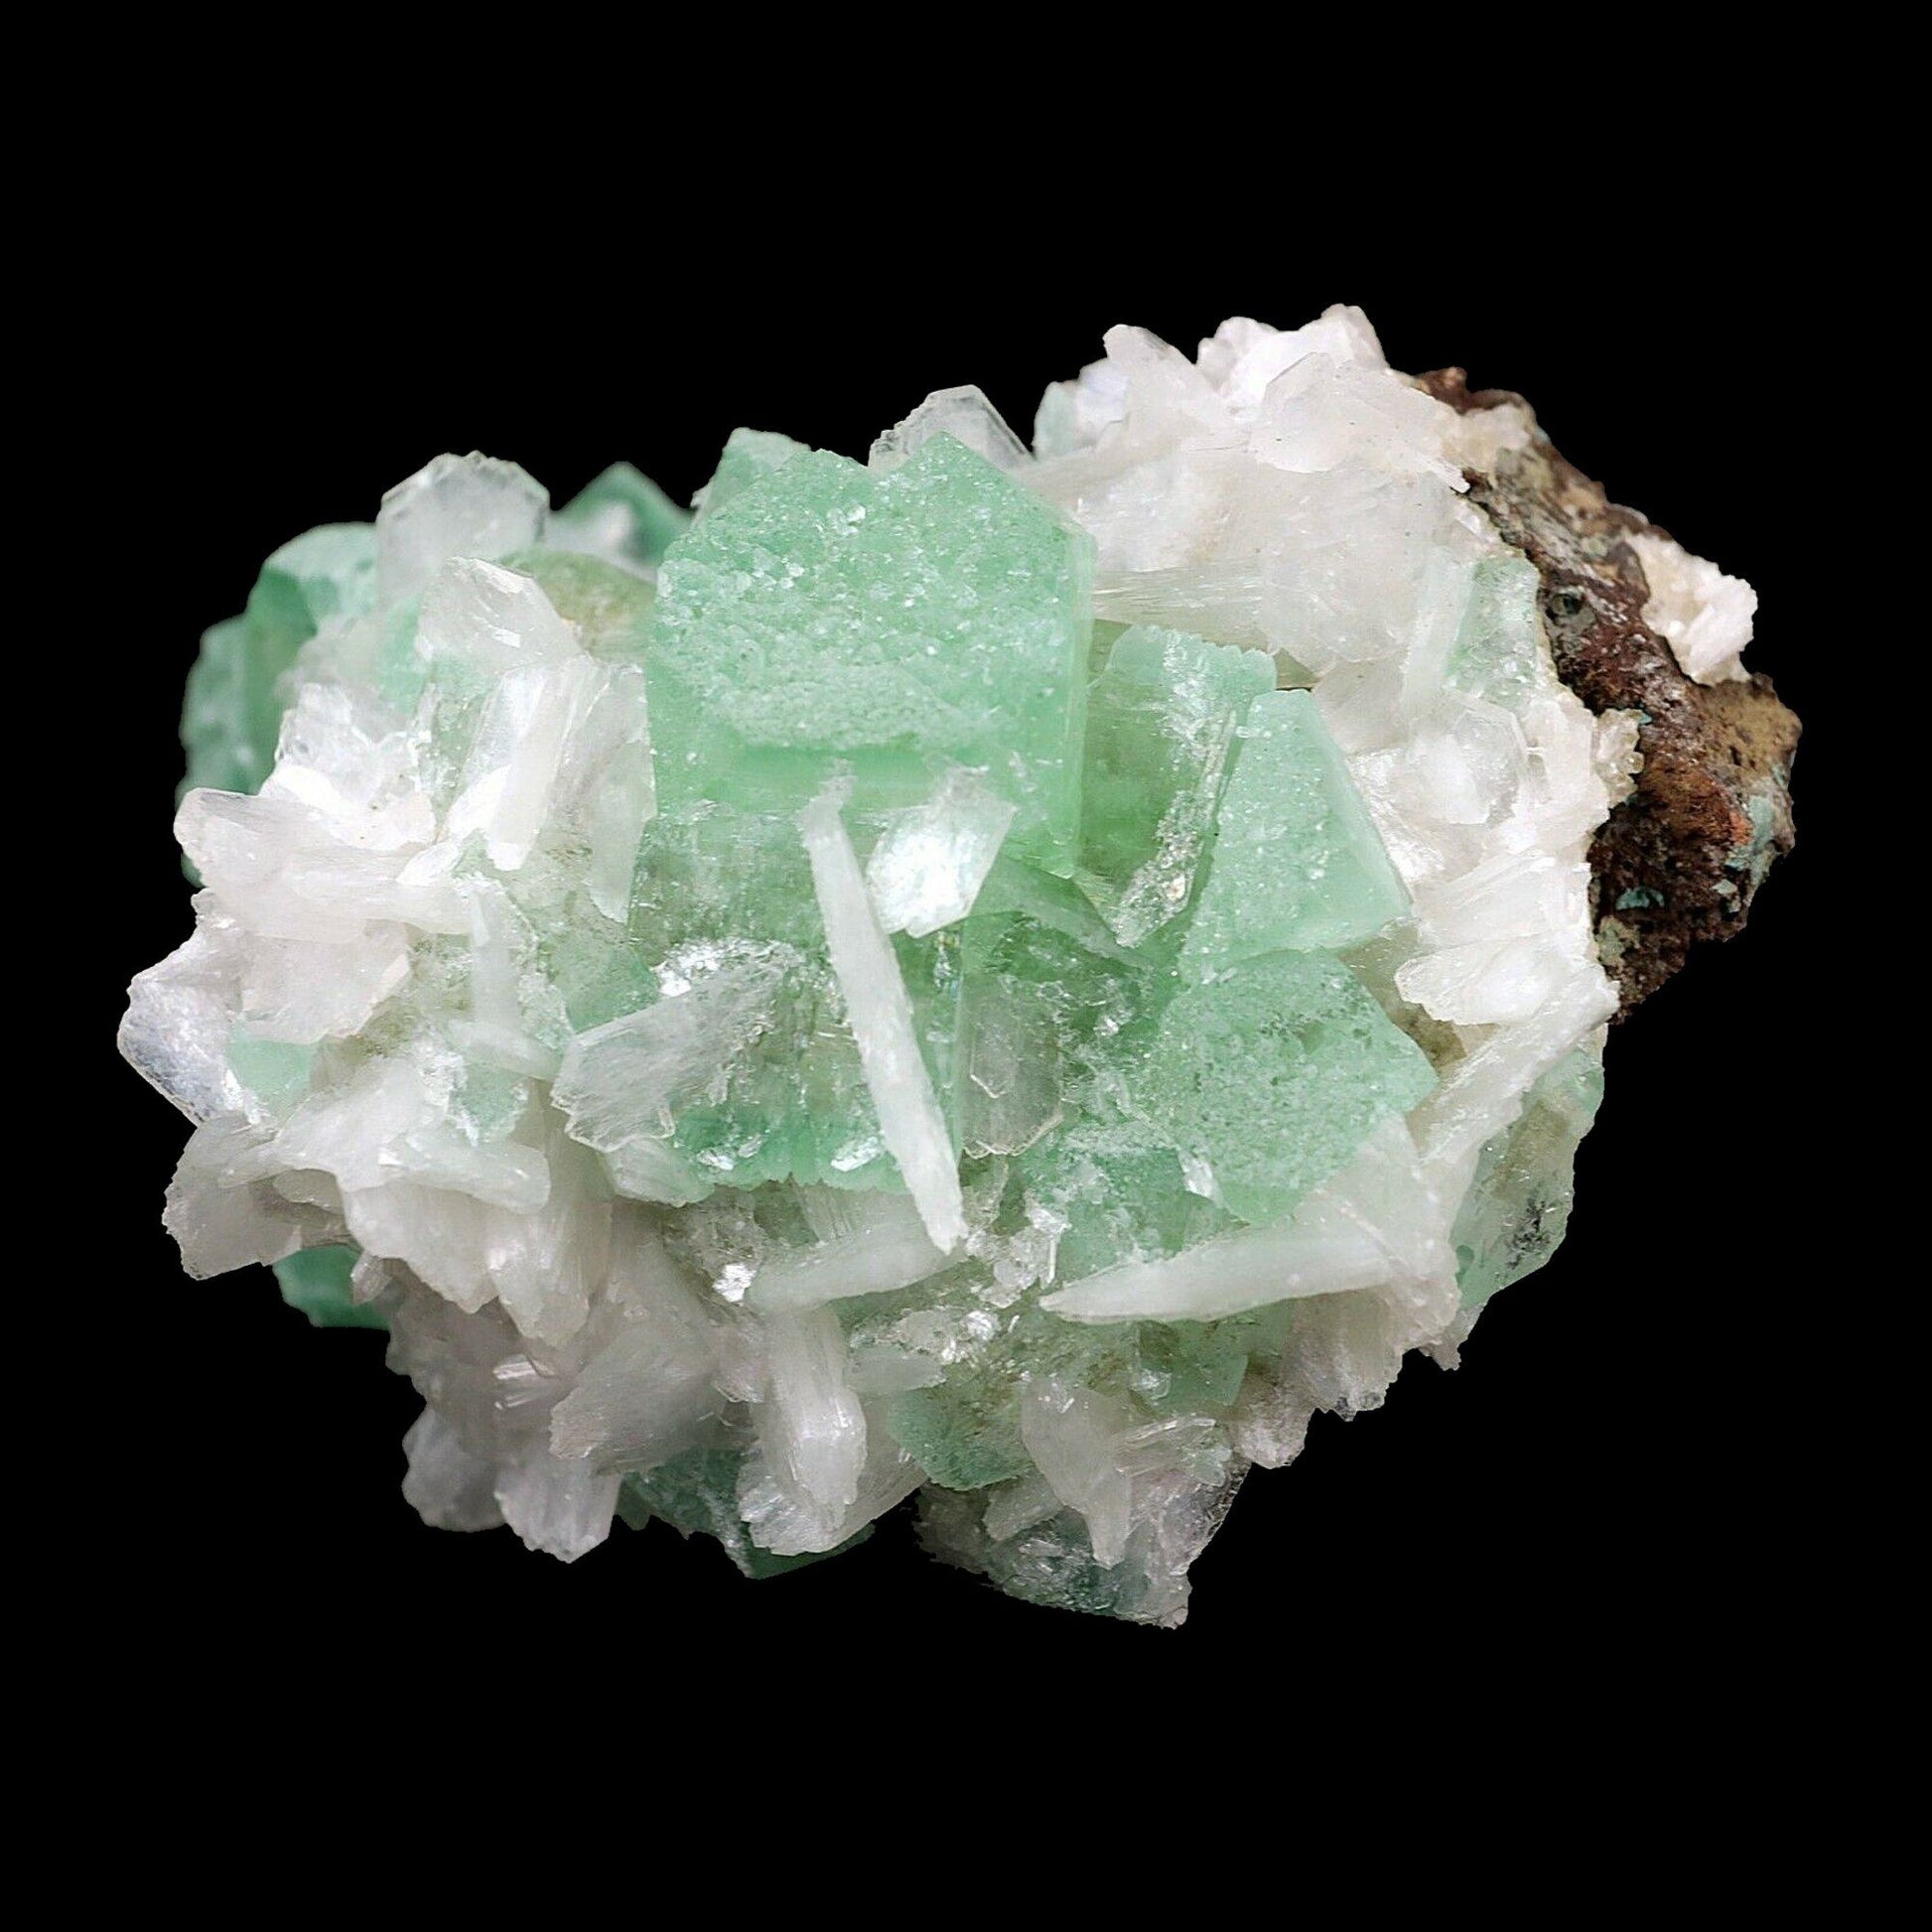 Green Apophyllite Crystal with Stilbite Natural Mineral Specimen # B 3…  https://www.superbminerals.us/products/apophyllite-green-crystal-with-stilbite-natural-mineral-specimen-b-3647  Features:Lovely Green Apophyllite Crystal Cluster Specimen with Stilbite from Aurangabad India. This unique specimen features a large green colored cubic formation Apophyllite with cream colored stilbite. This is a beautiful Zeolite specimen! Primary Mineral(s): ApophylliteSecondary Mineral(s): Stilbite